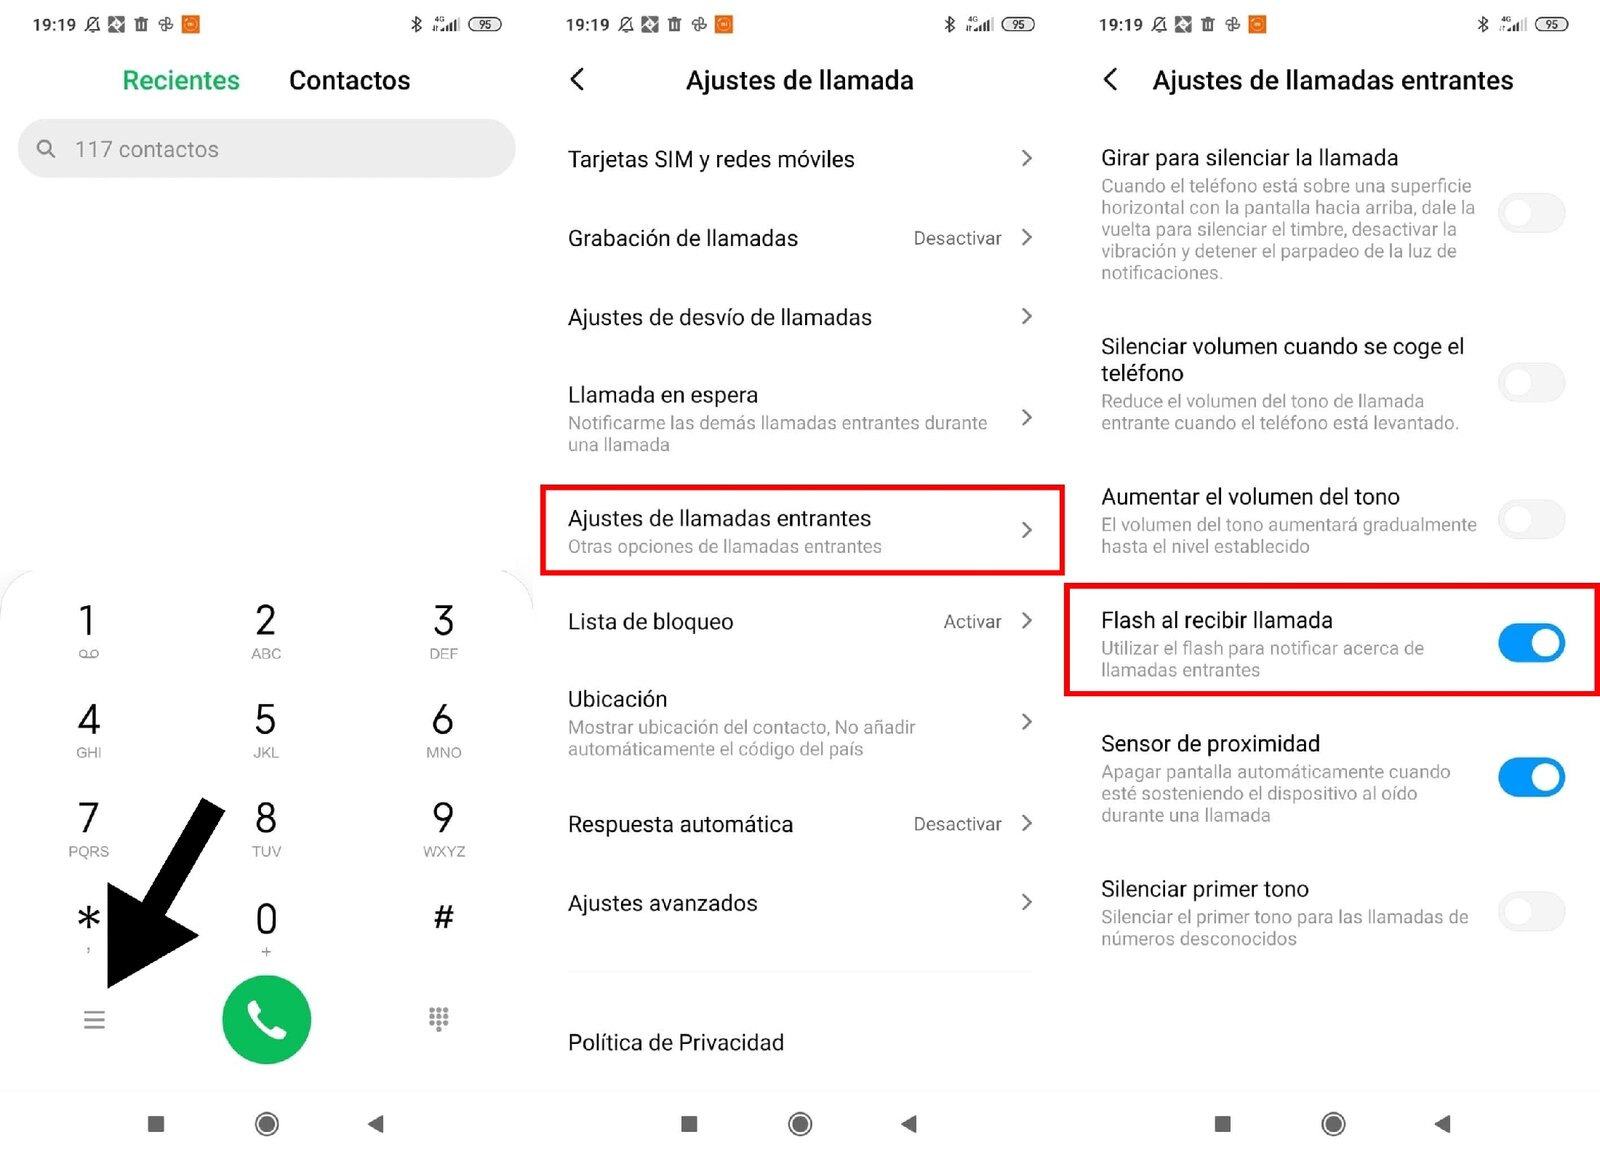 Activate the flash for calls on Xiaomi